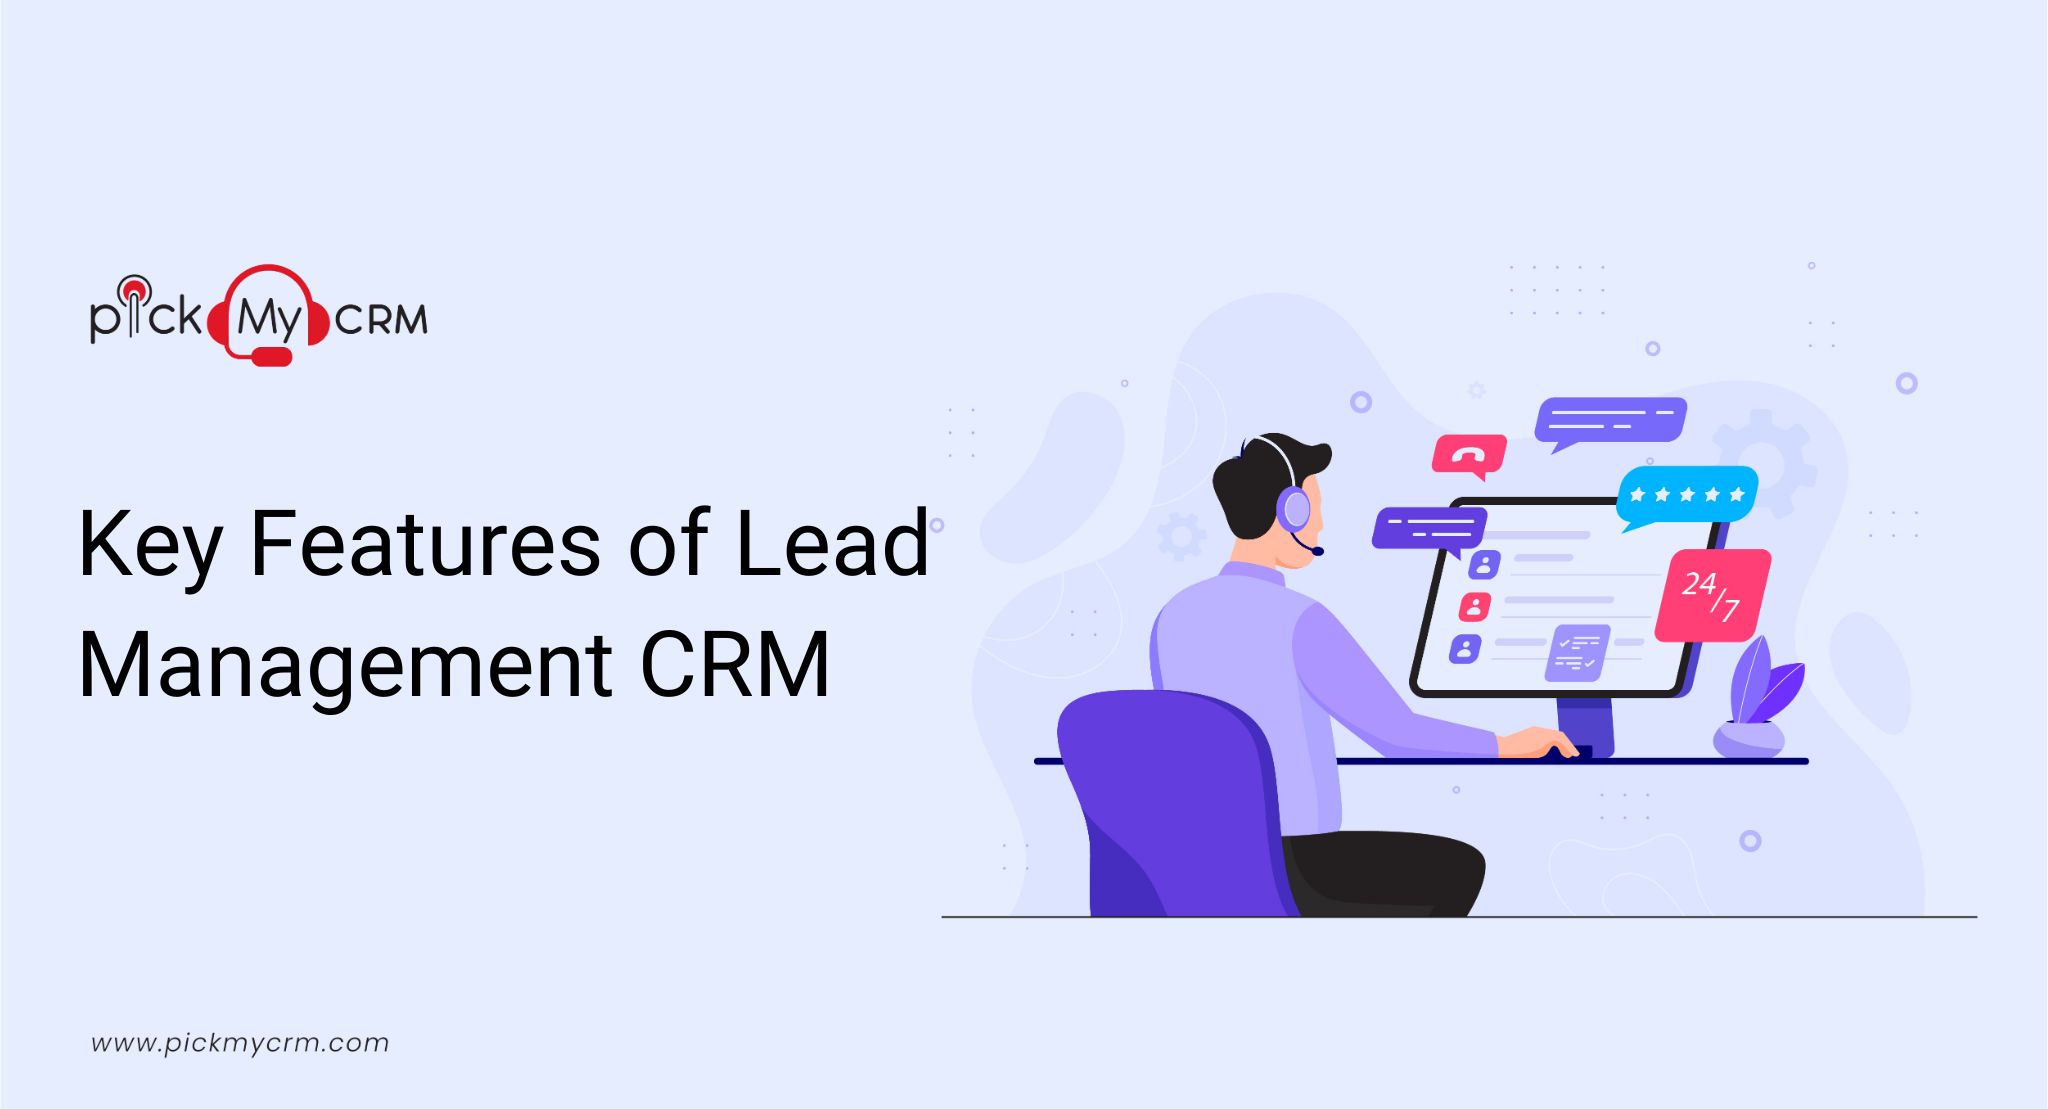 Key Features of Lead Management CRM